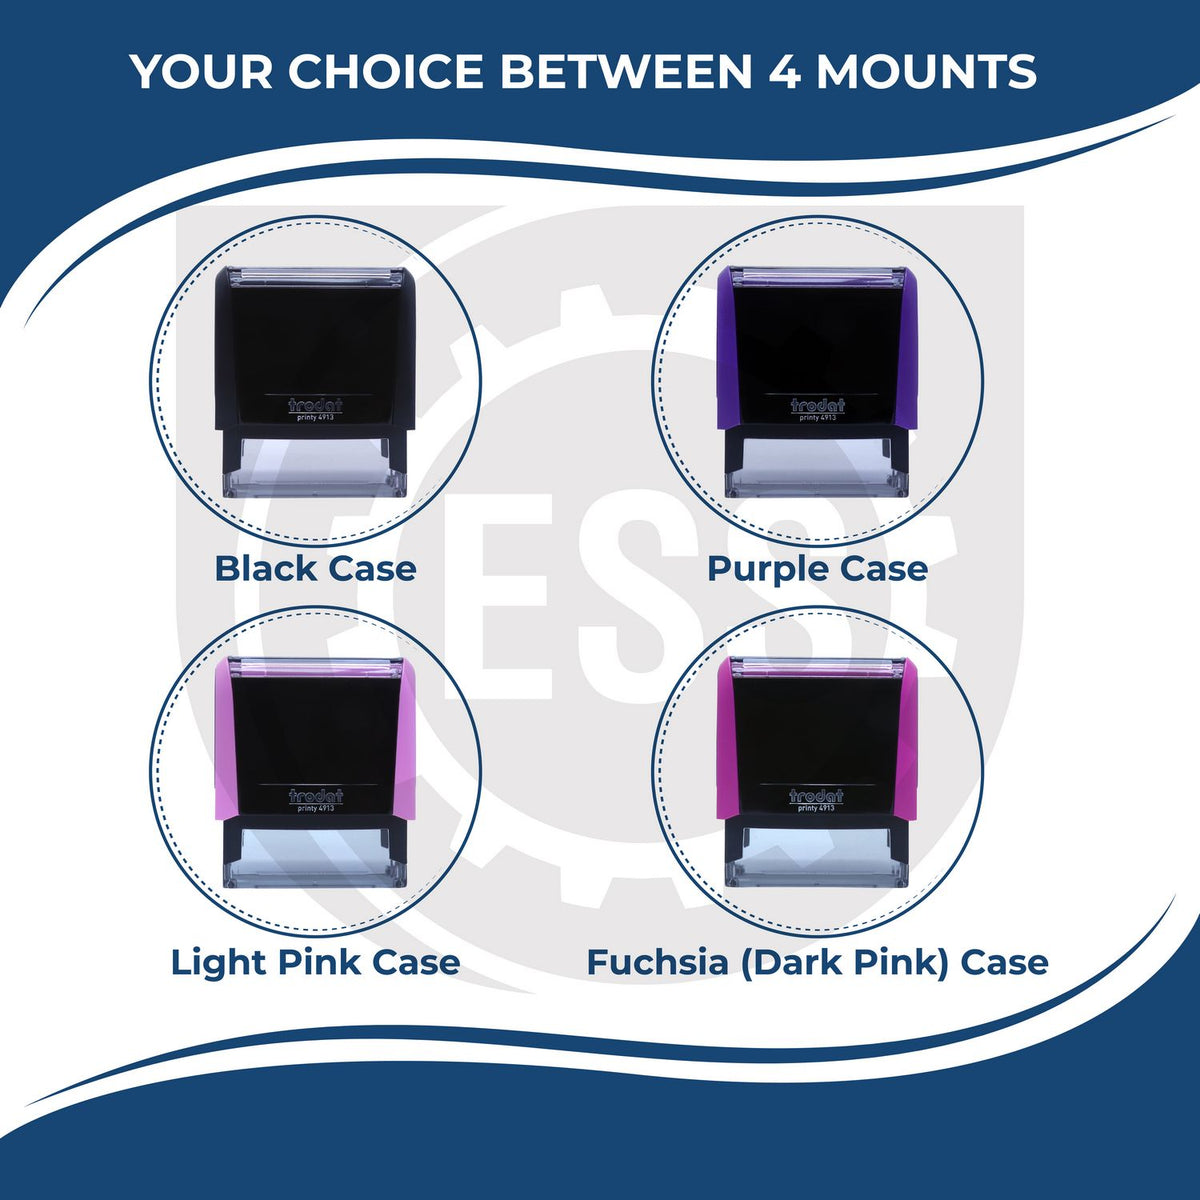 A picture of different colored mounts for the Self-Inking Rectangular North Dakota Notary Stamp featurning a Red, Blue or Black Mount